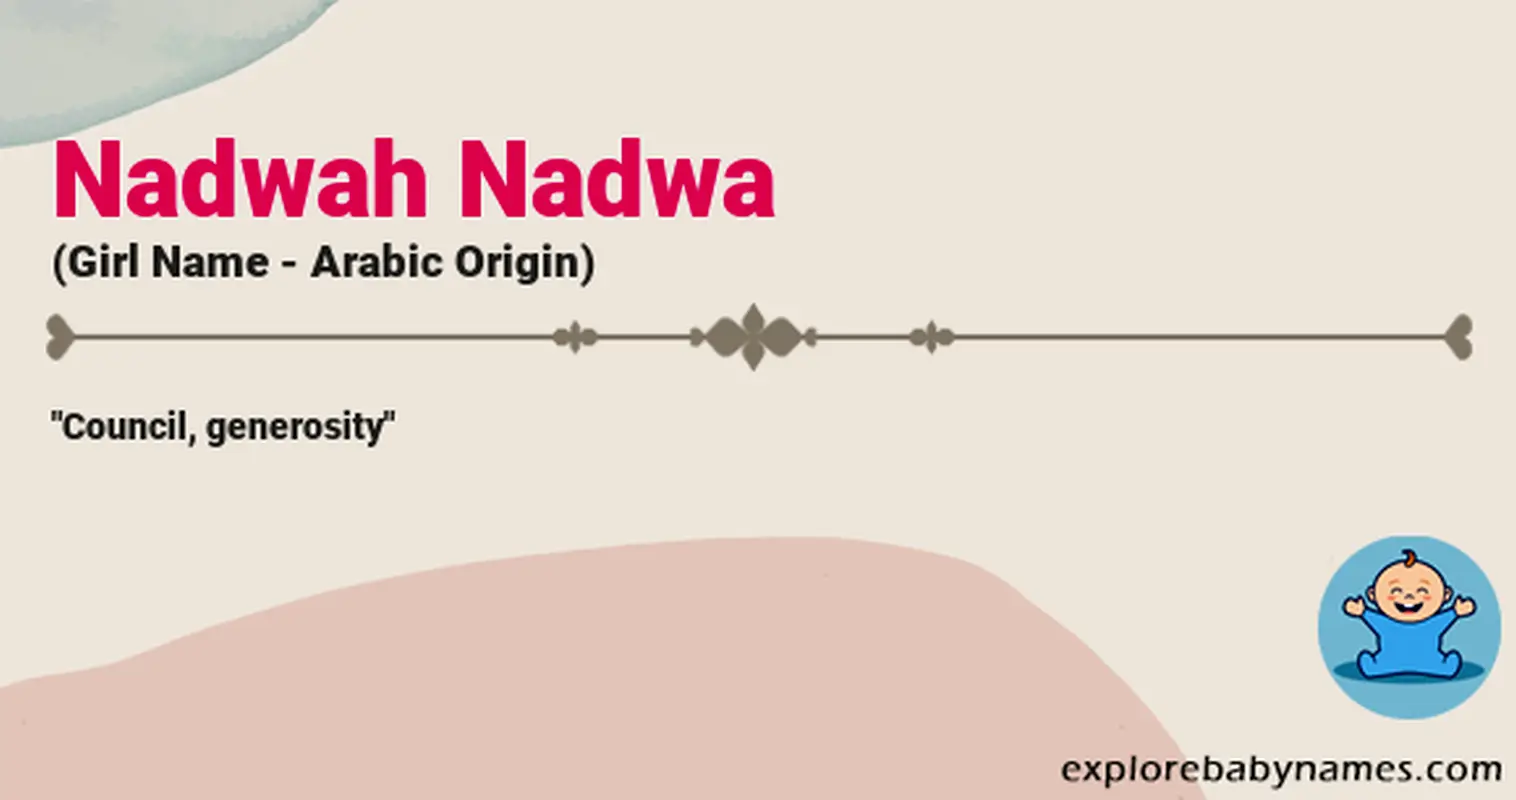 Meaning of Nadwah Nadwa